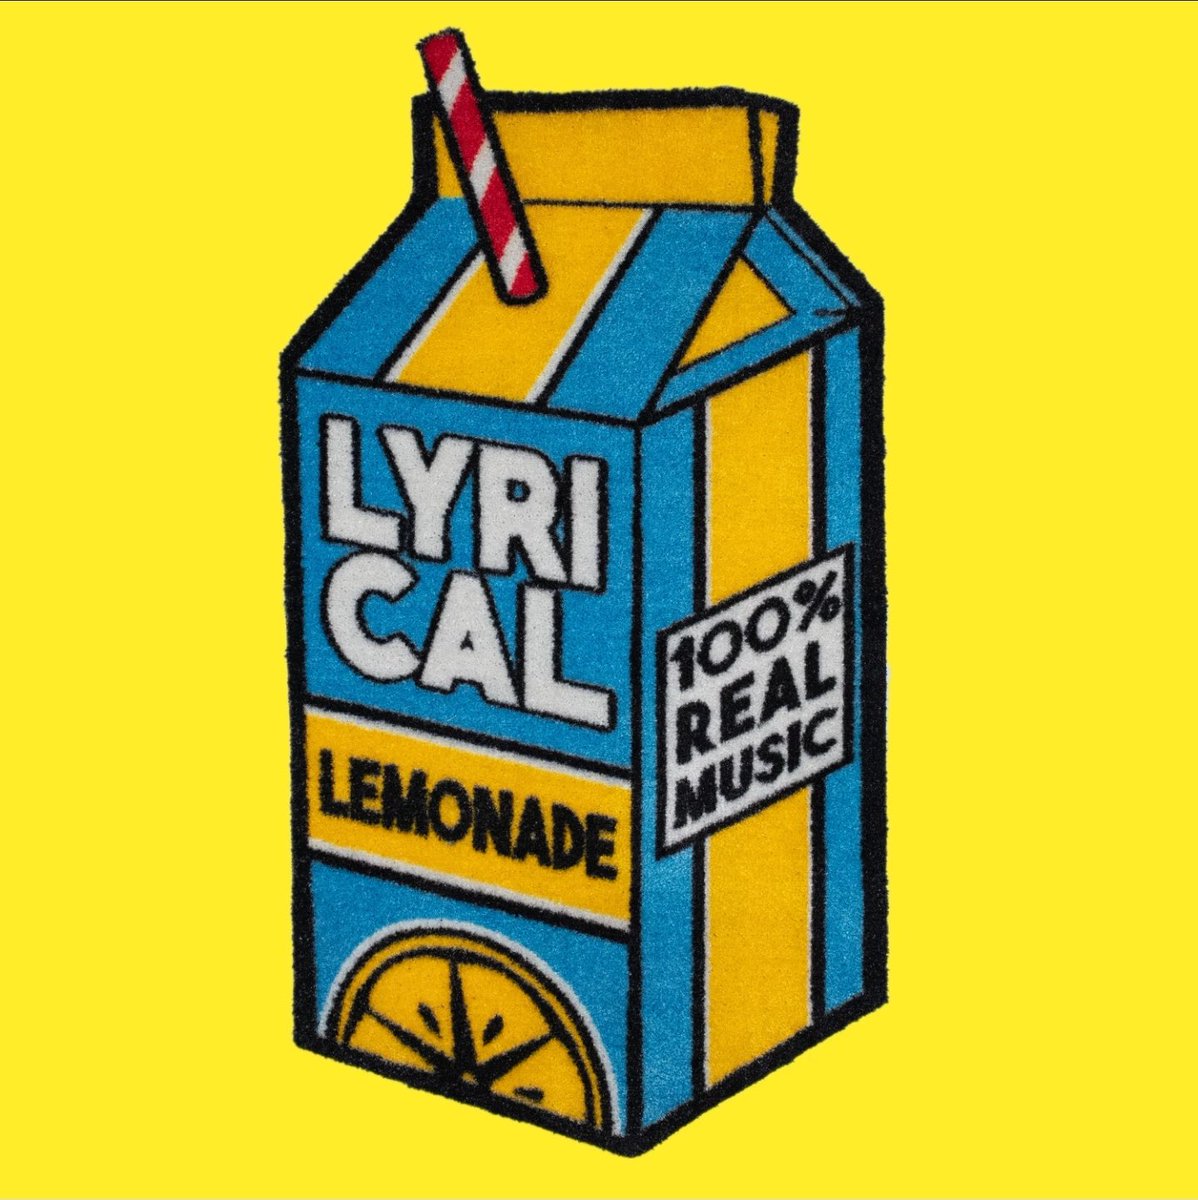 The song debuted at #74 on the Billboard Hot 100, becoming his first top 10 and highest selling track. On May 10th, 2018, Cole Bennett released a music video, which he filmed and directed, on his channel ‘Lyrical Lemonade’. As a result, Juice’s career absolutely skyrocketed.